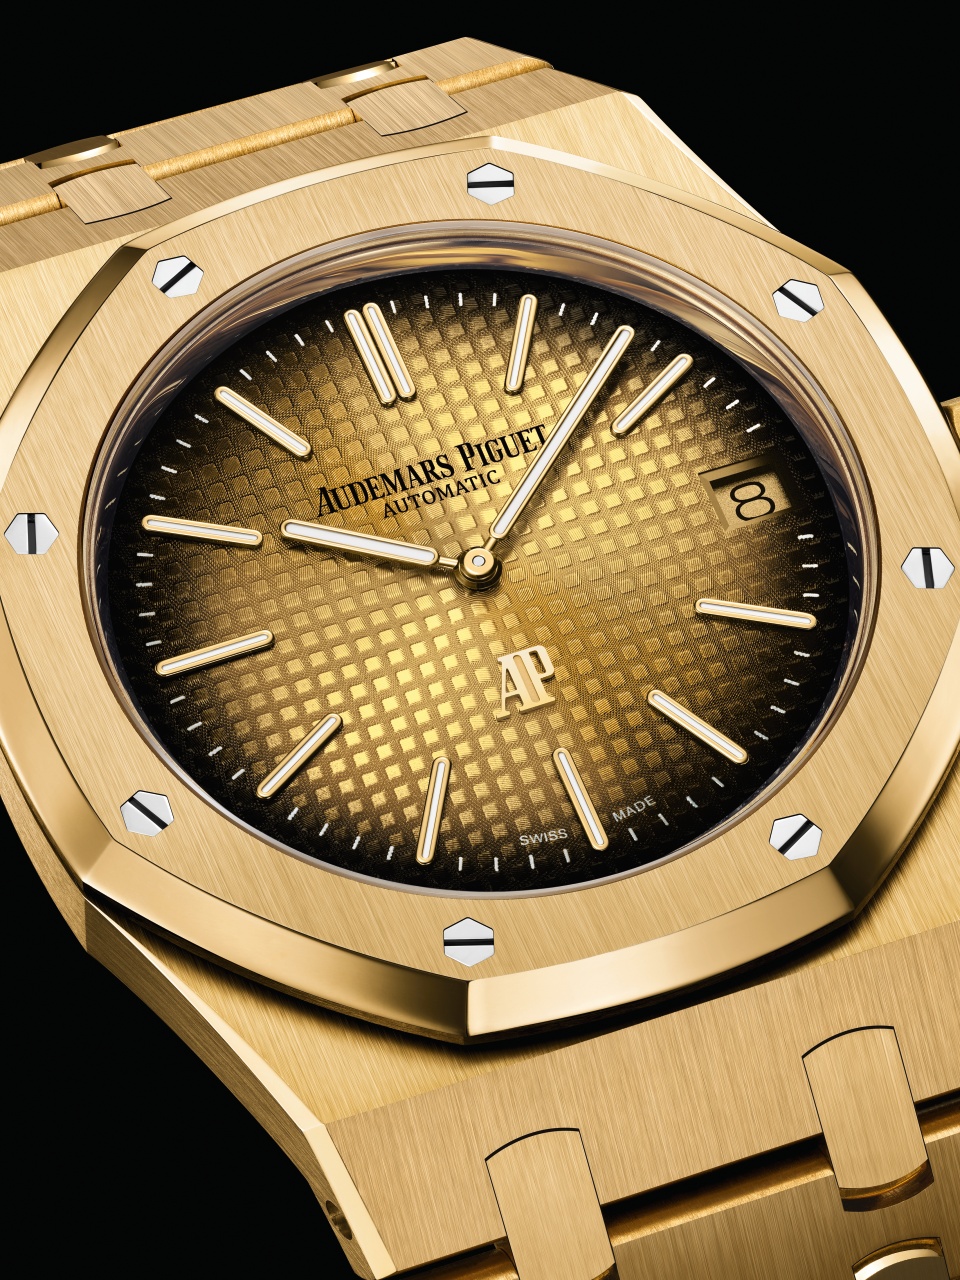 Welcome to the all-new Audemars Piguet Royal Oak Jumbo Extra Thin